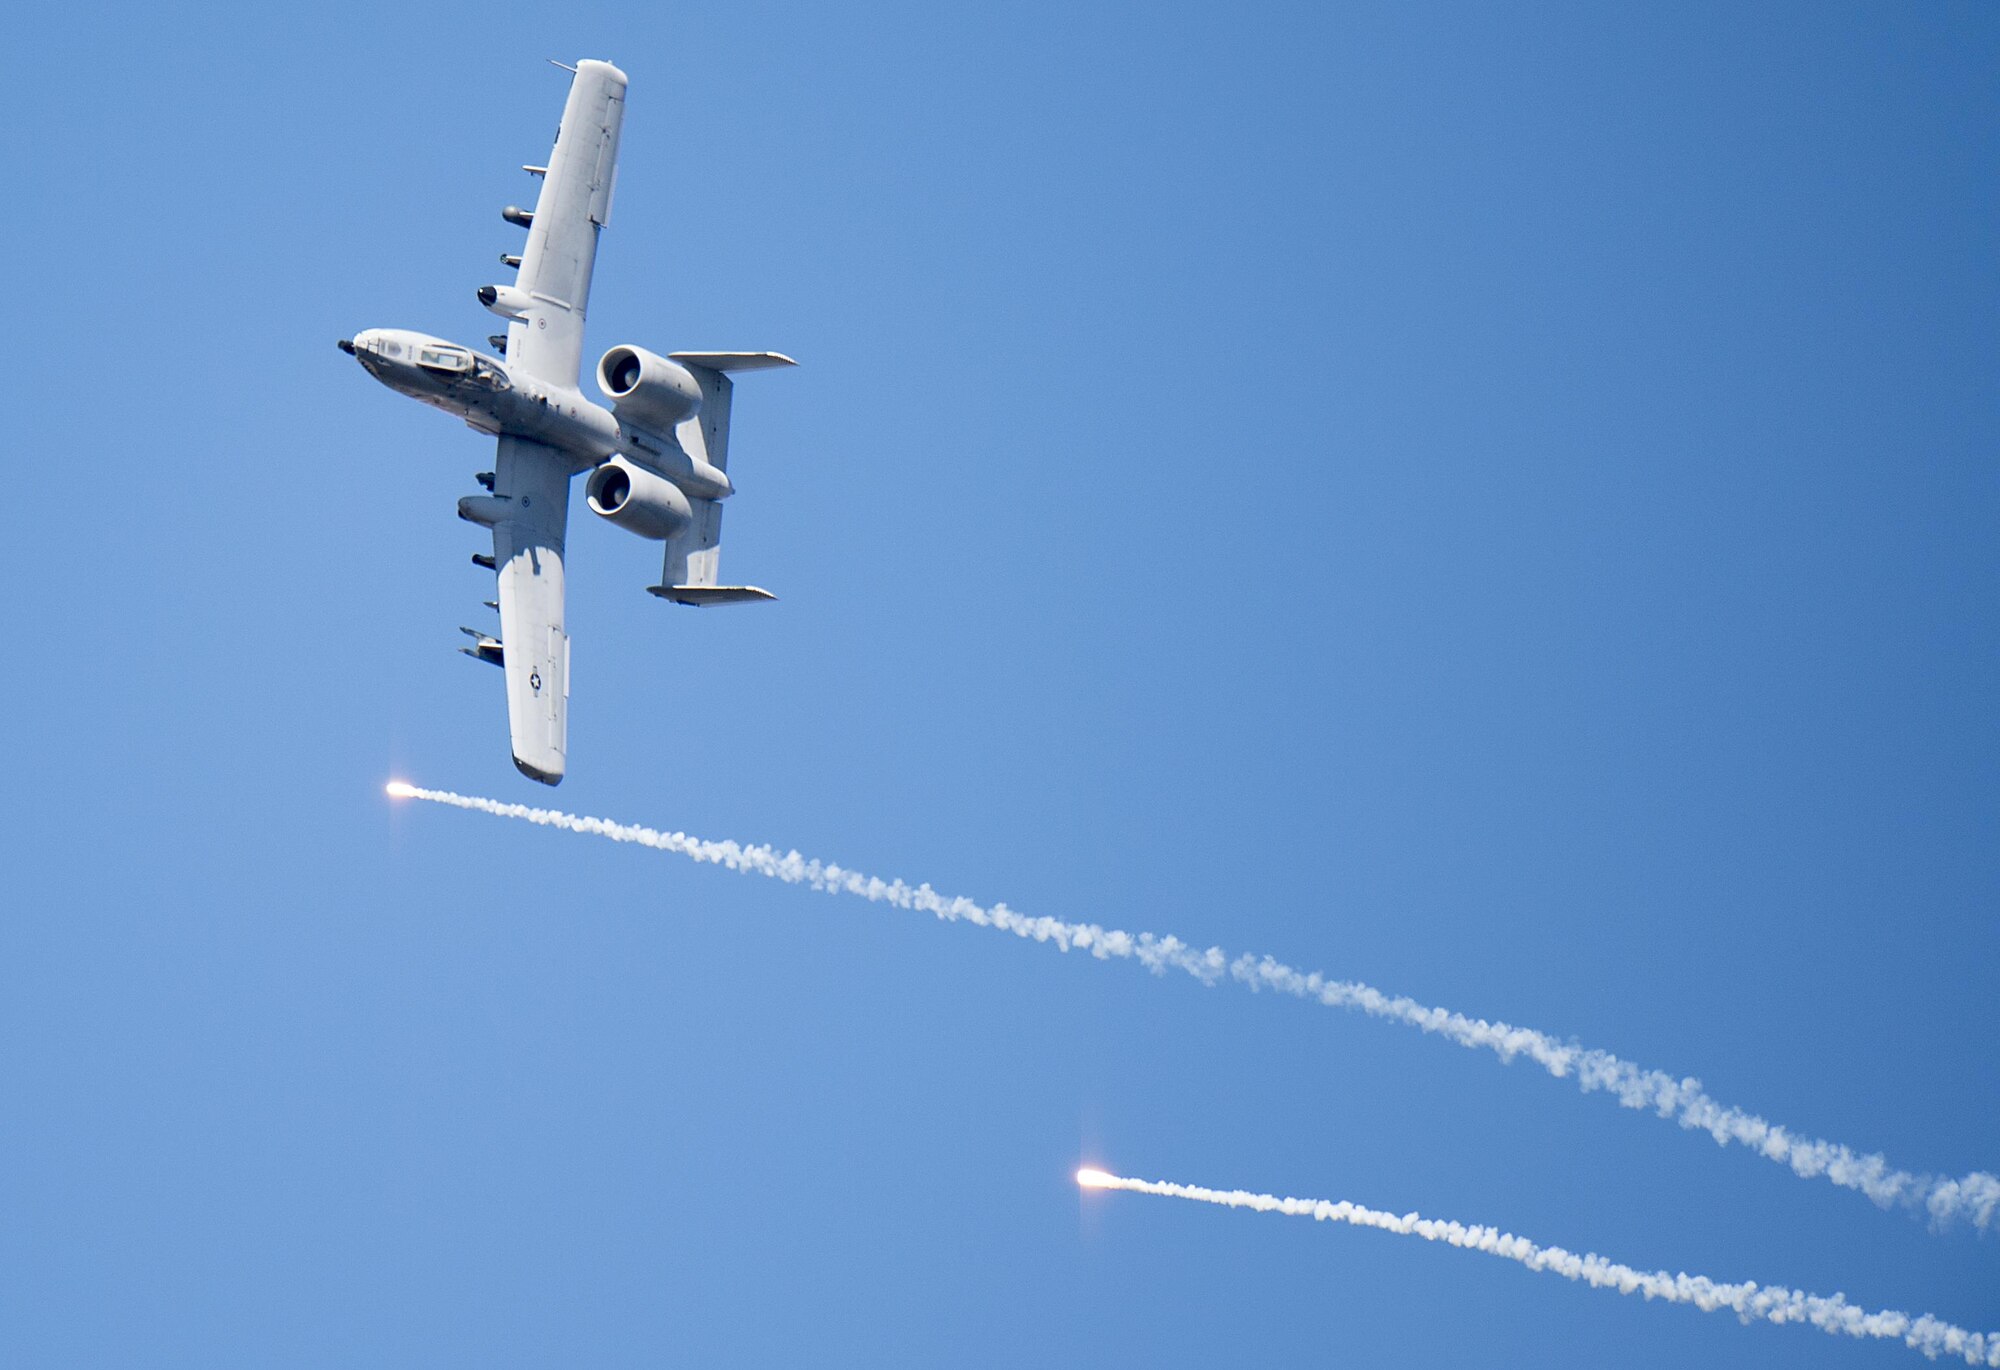 An A-10 Thunderbolt II releases flares over Grand Bay Bombing and Gunnery Range at Moody Air Force Base, Ga., Feb. 18, 2016. Multiple U.S. Air Force aircraft within Air Combat Command conducted joint combat rescue and aerial training that showcased the aircrafts tactical air and ground maneuvers, as well as its weapons capabilities. (U.S. Air Force photo by Staff Sgt. Brian J. Valencia/Released)